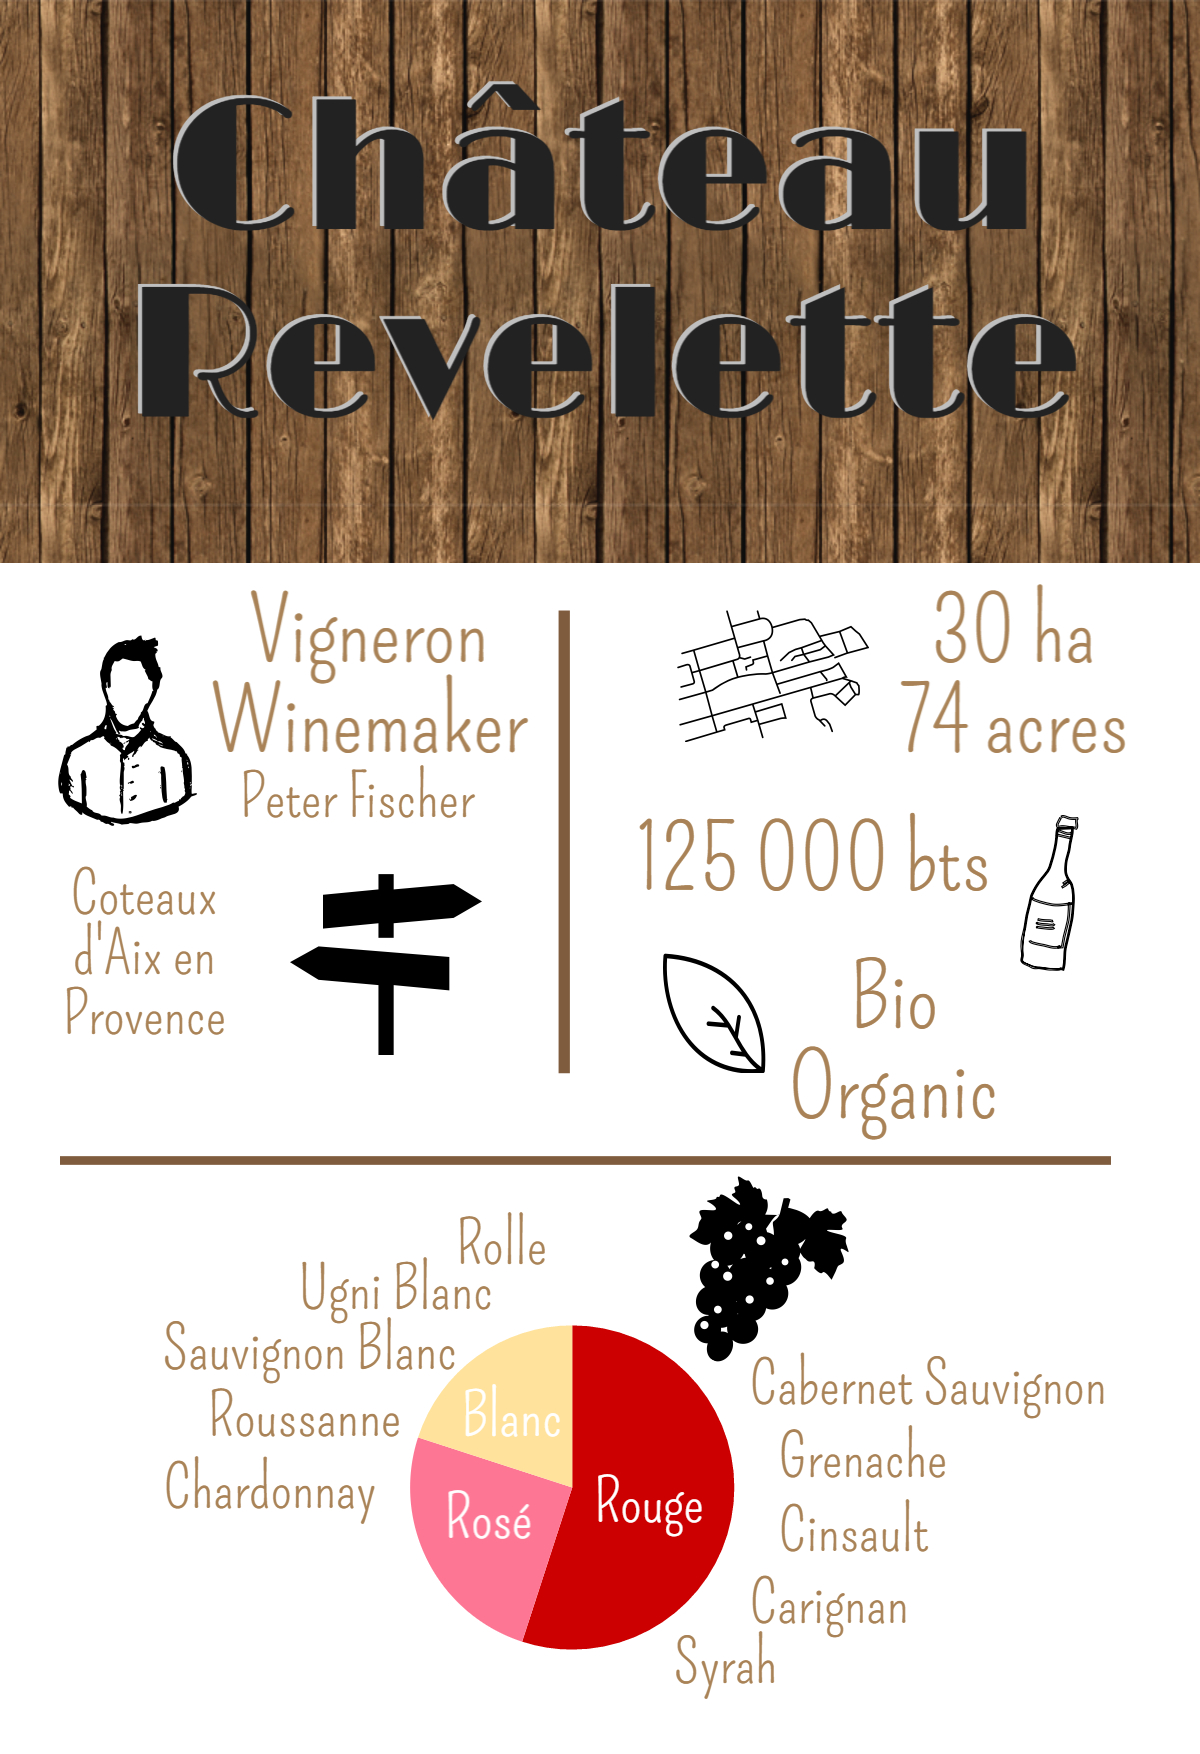 peter fischer chateau revelette infographie